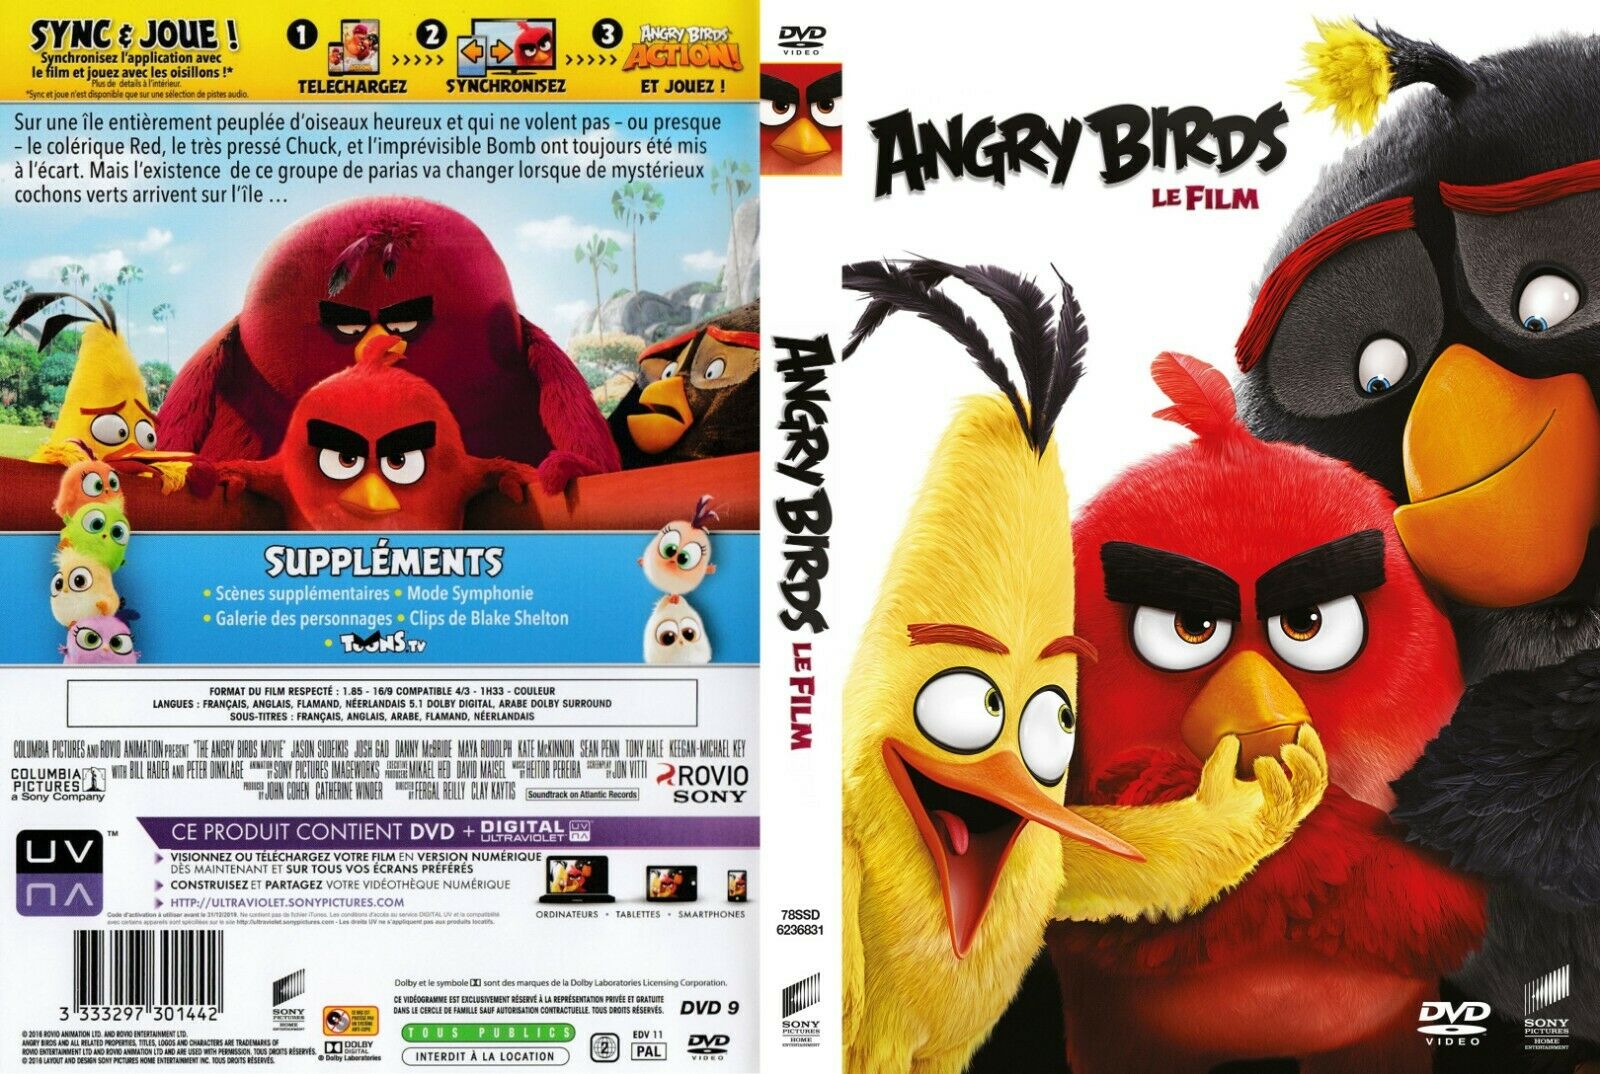 Jaquette DVD Angry birds le film